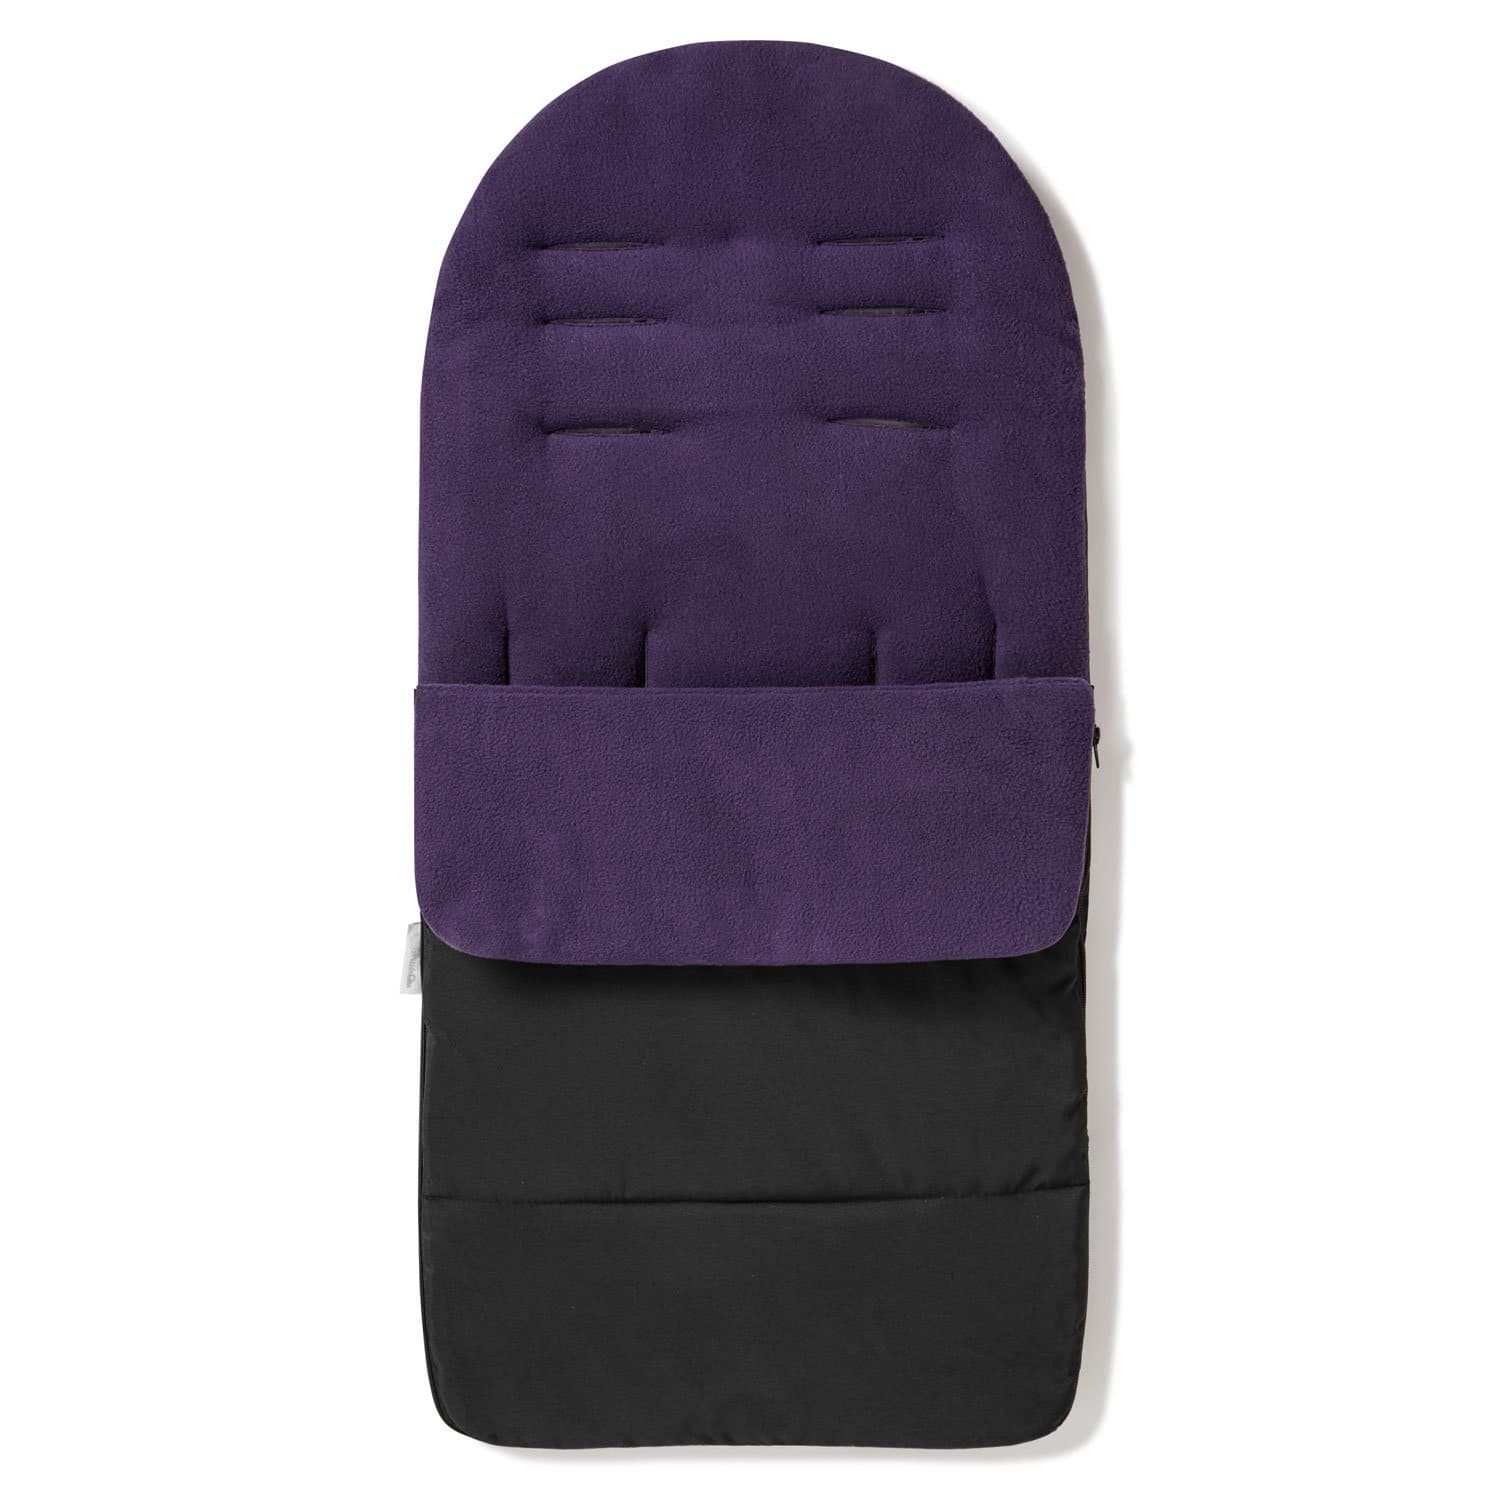 Premium Footmuff / Cosy Toes Compatible with Diono - Plum Purple / Fits All Models | For Your Little One